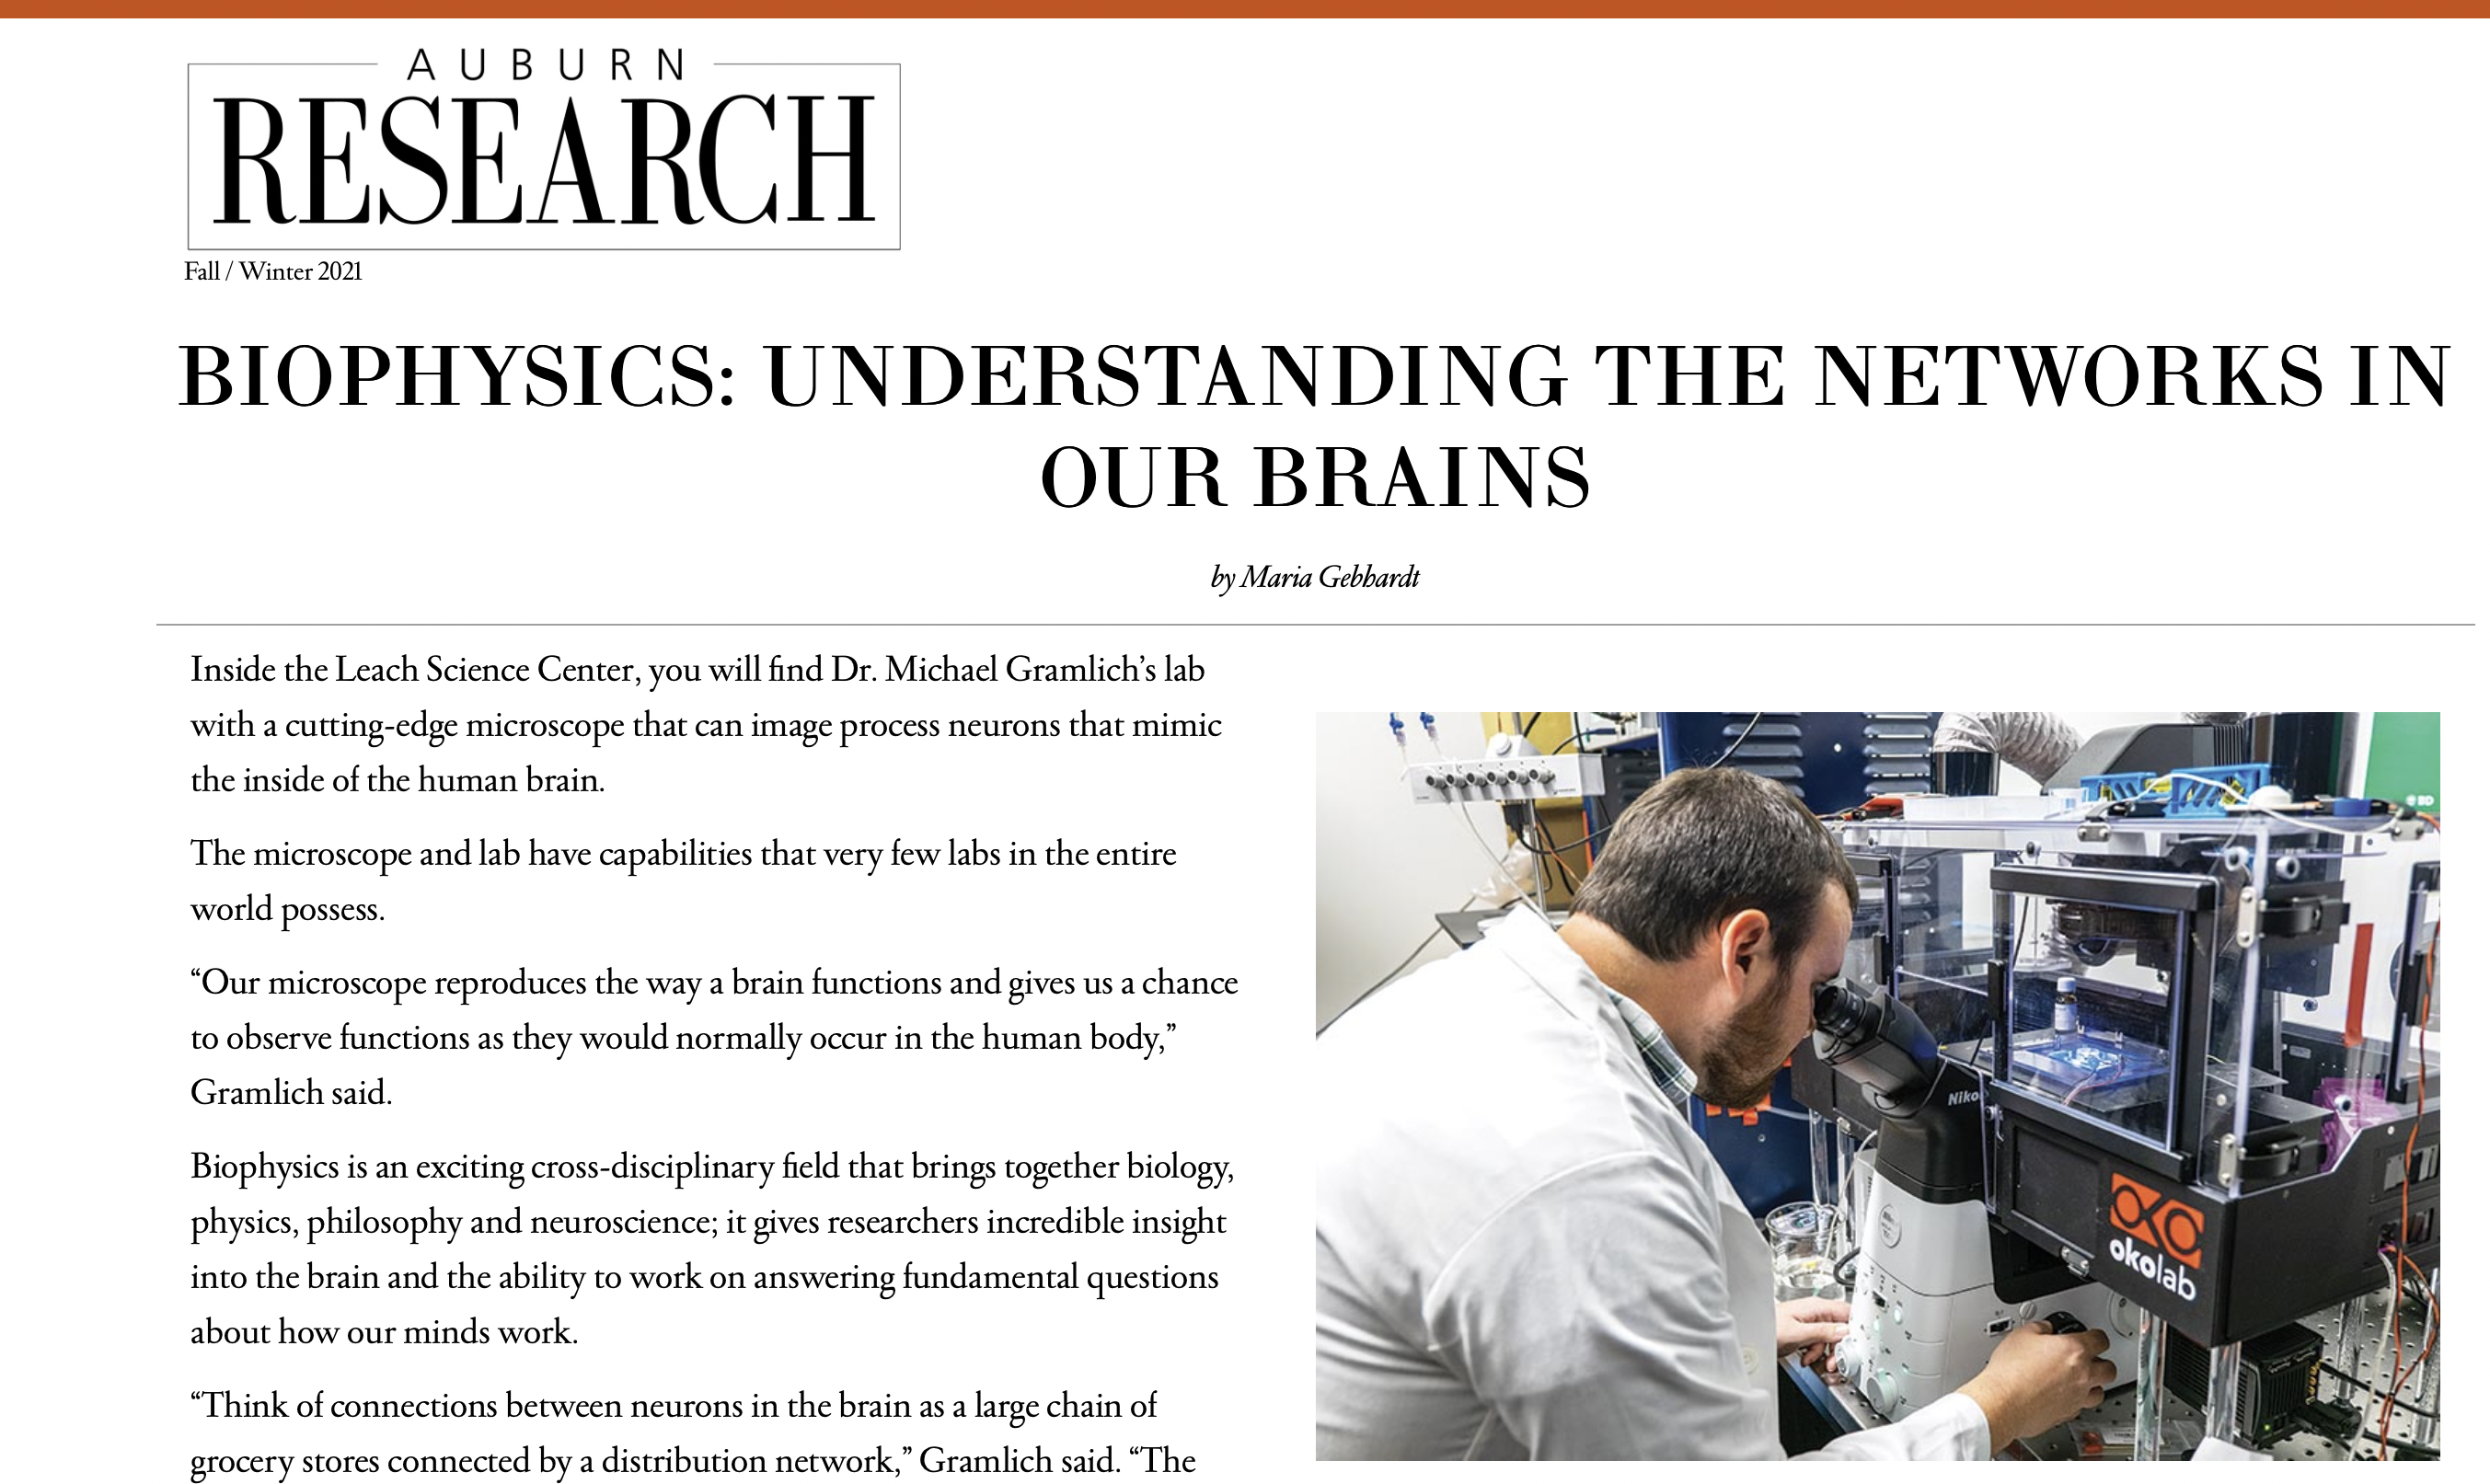 Biophysics: Understanding the networks in our brains